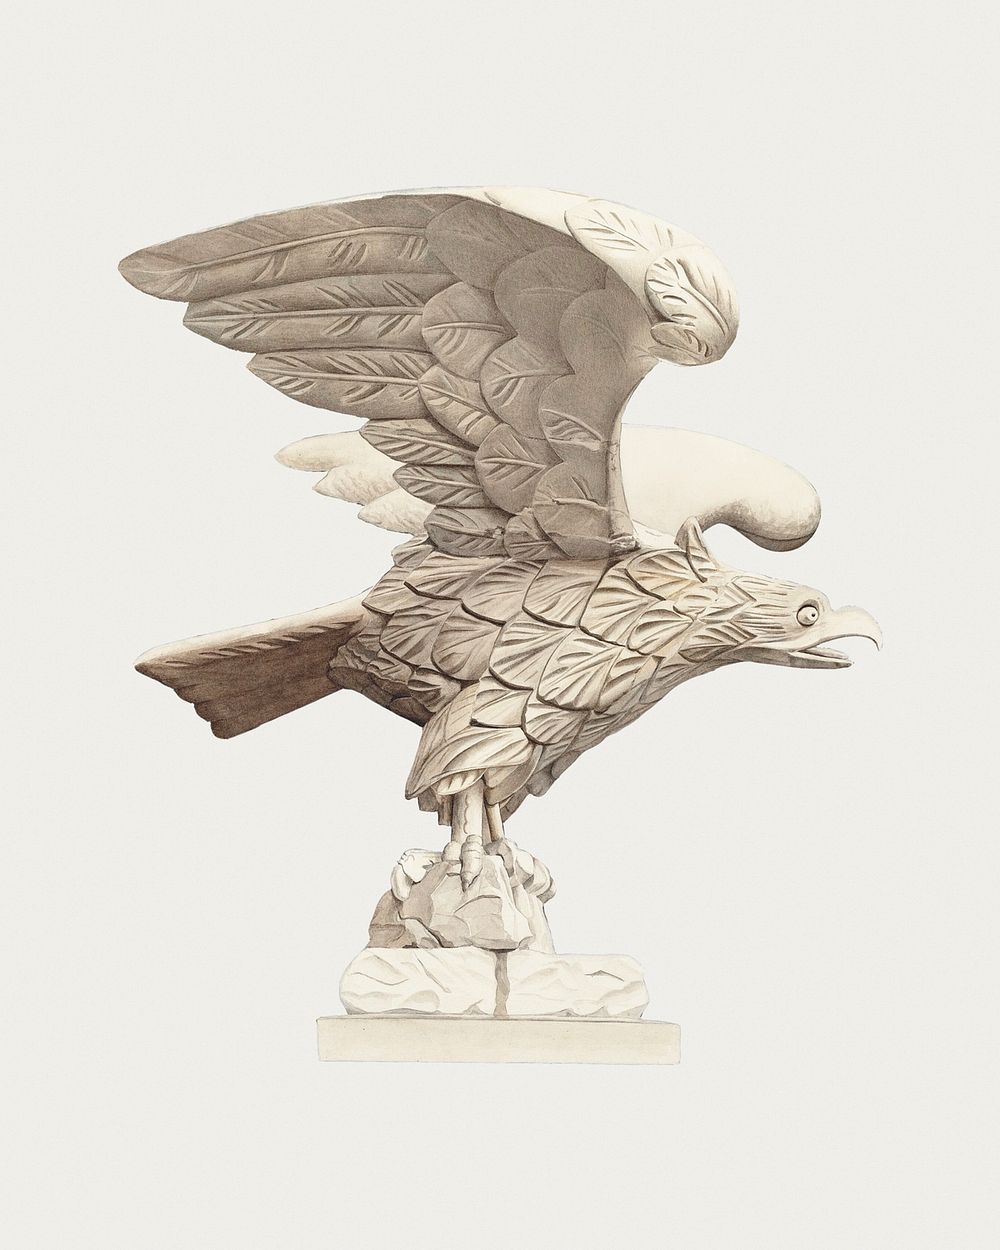 Vintage wooden eagle illustration, remixed from the artwork by Henry Murphy